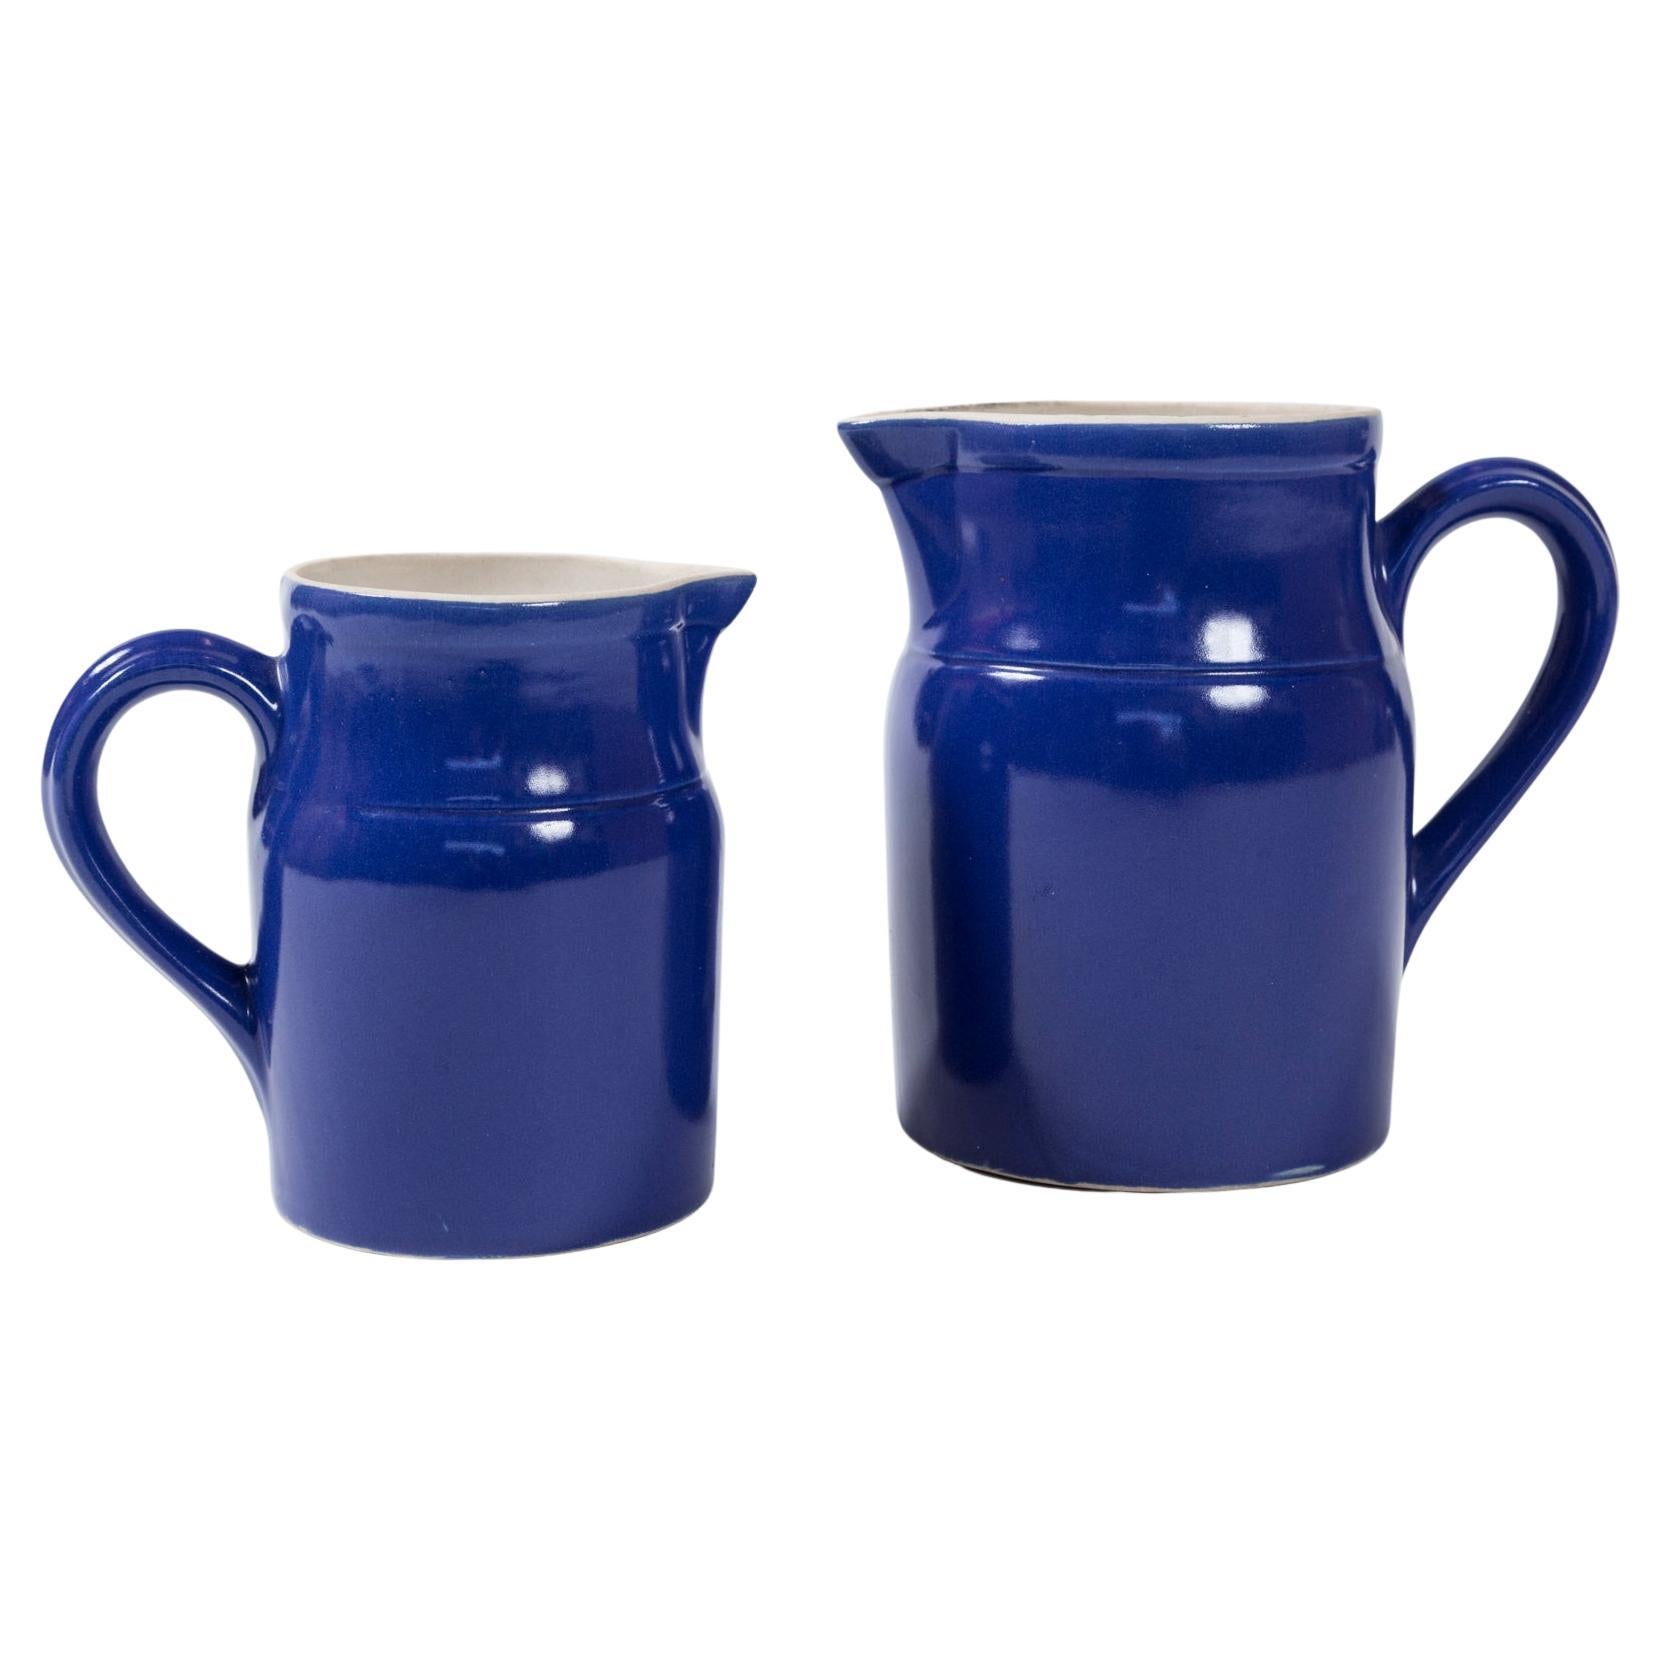 Two Vintage Ceramic Dairy Pitchers, Digoin, France, circa 1960's For Sale